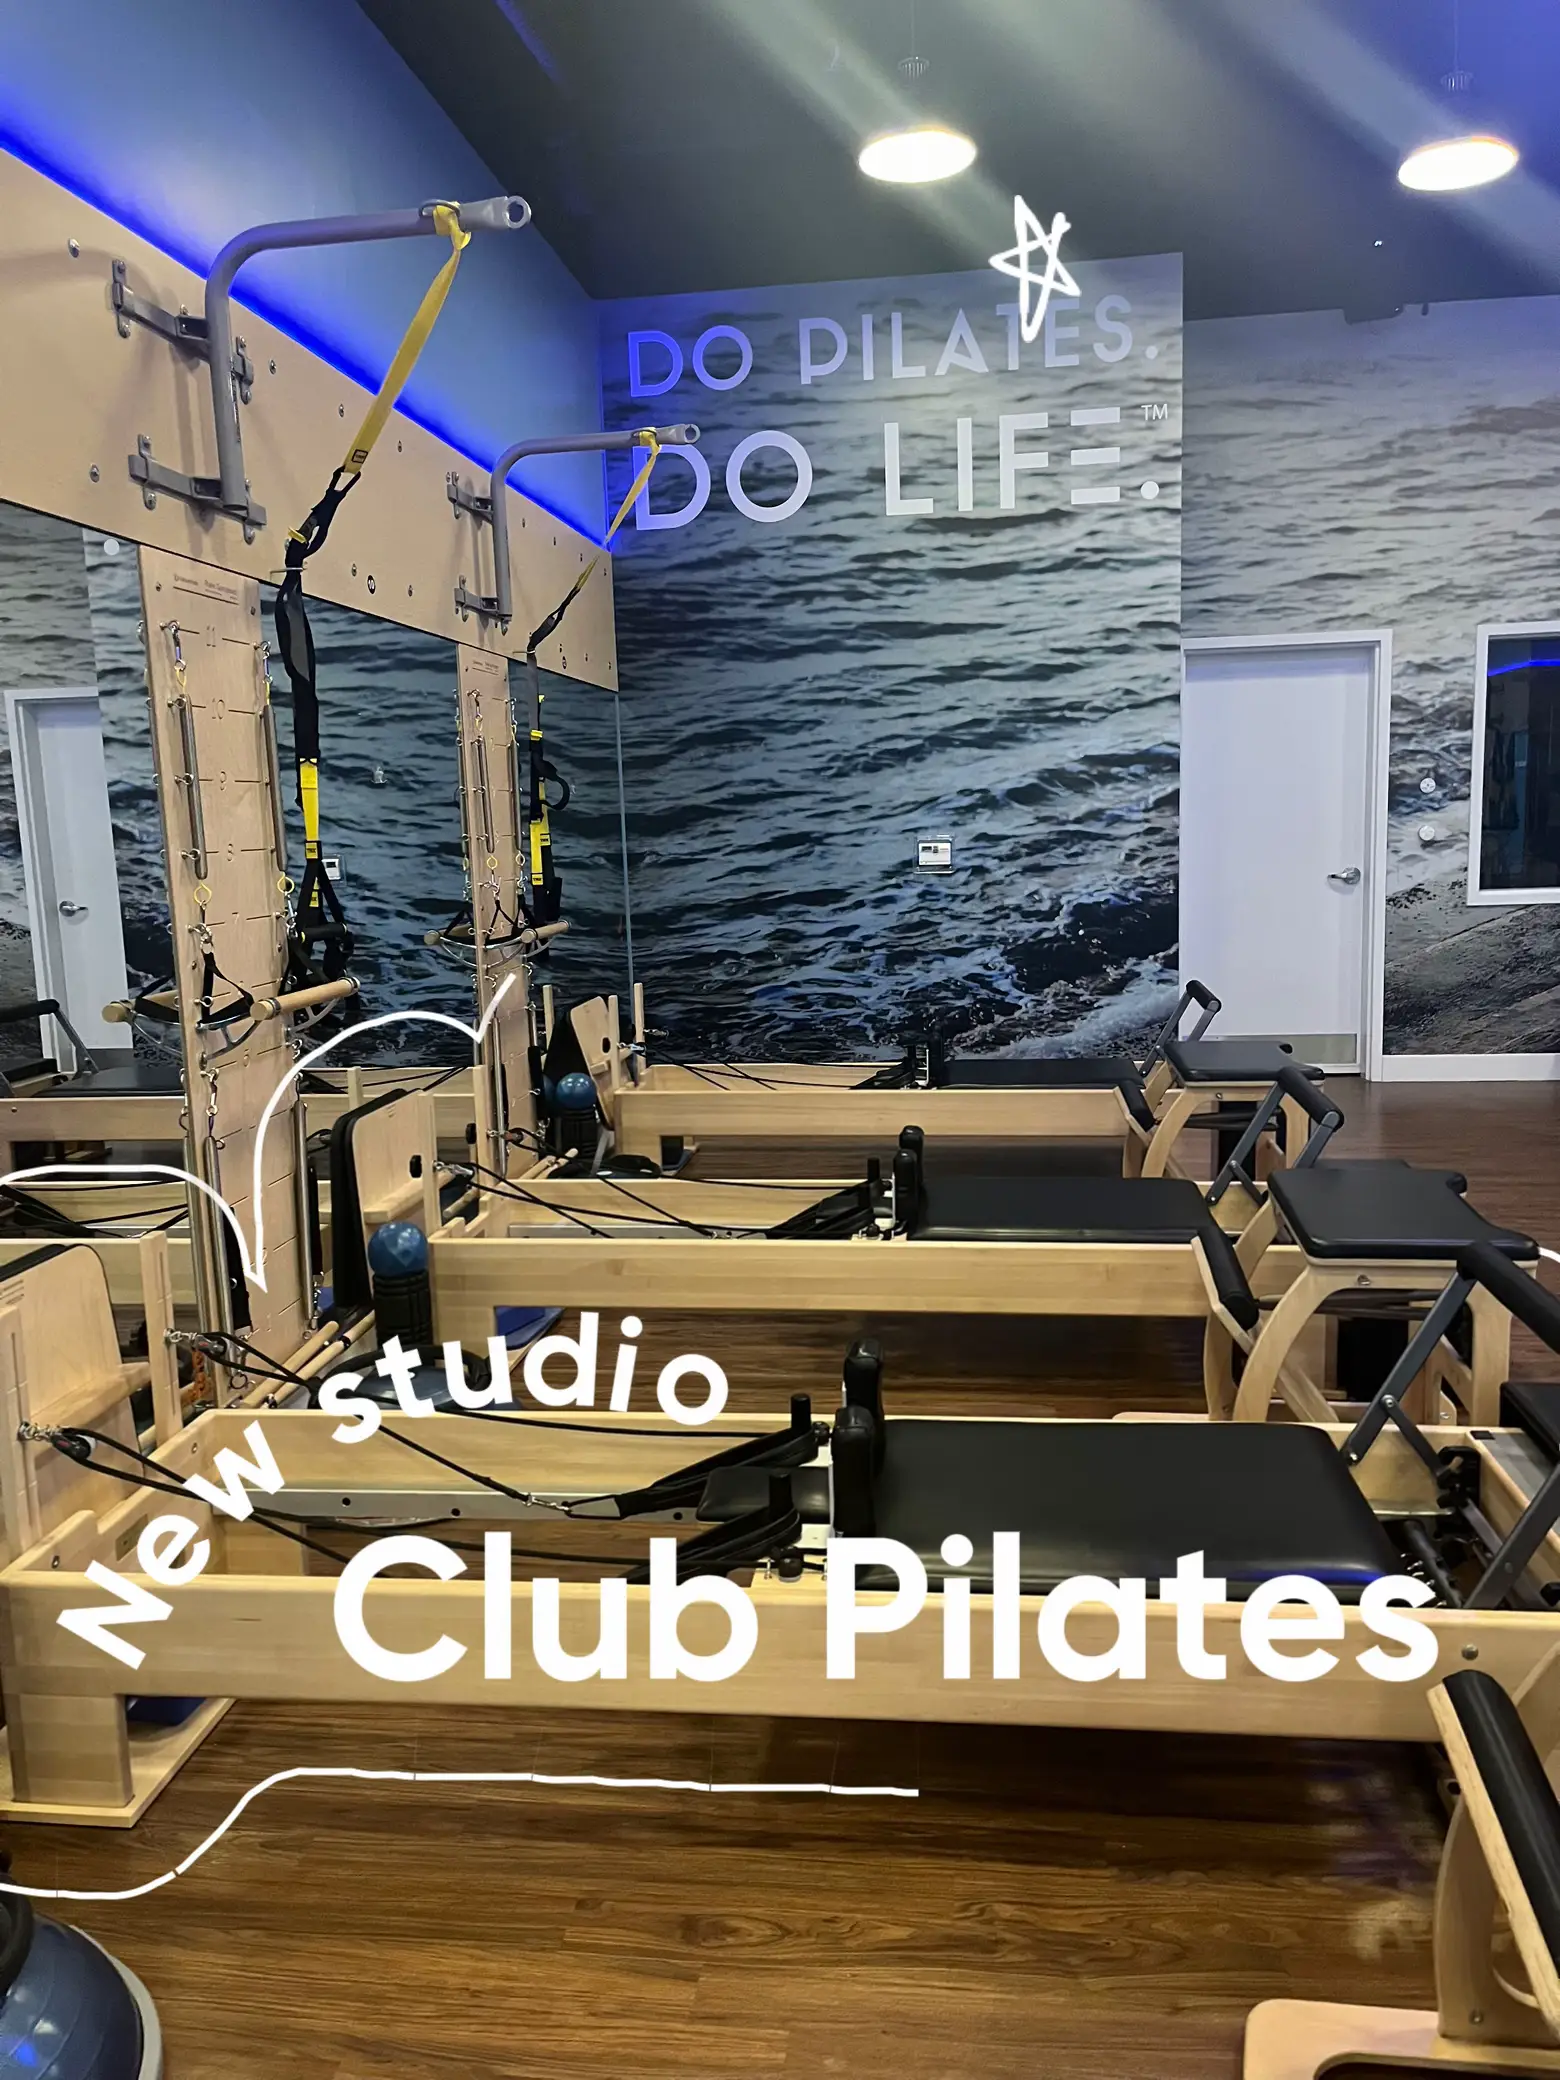 Reformer Pilates at Club Pilates: Week 3 - The Healthy Mouse